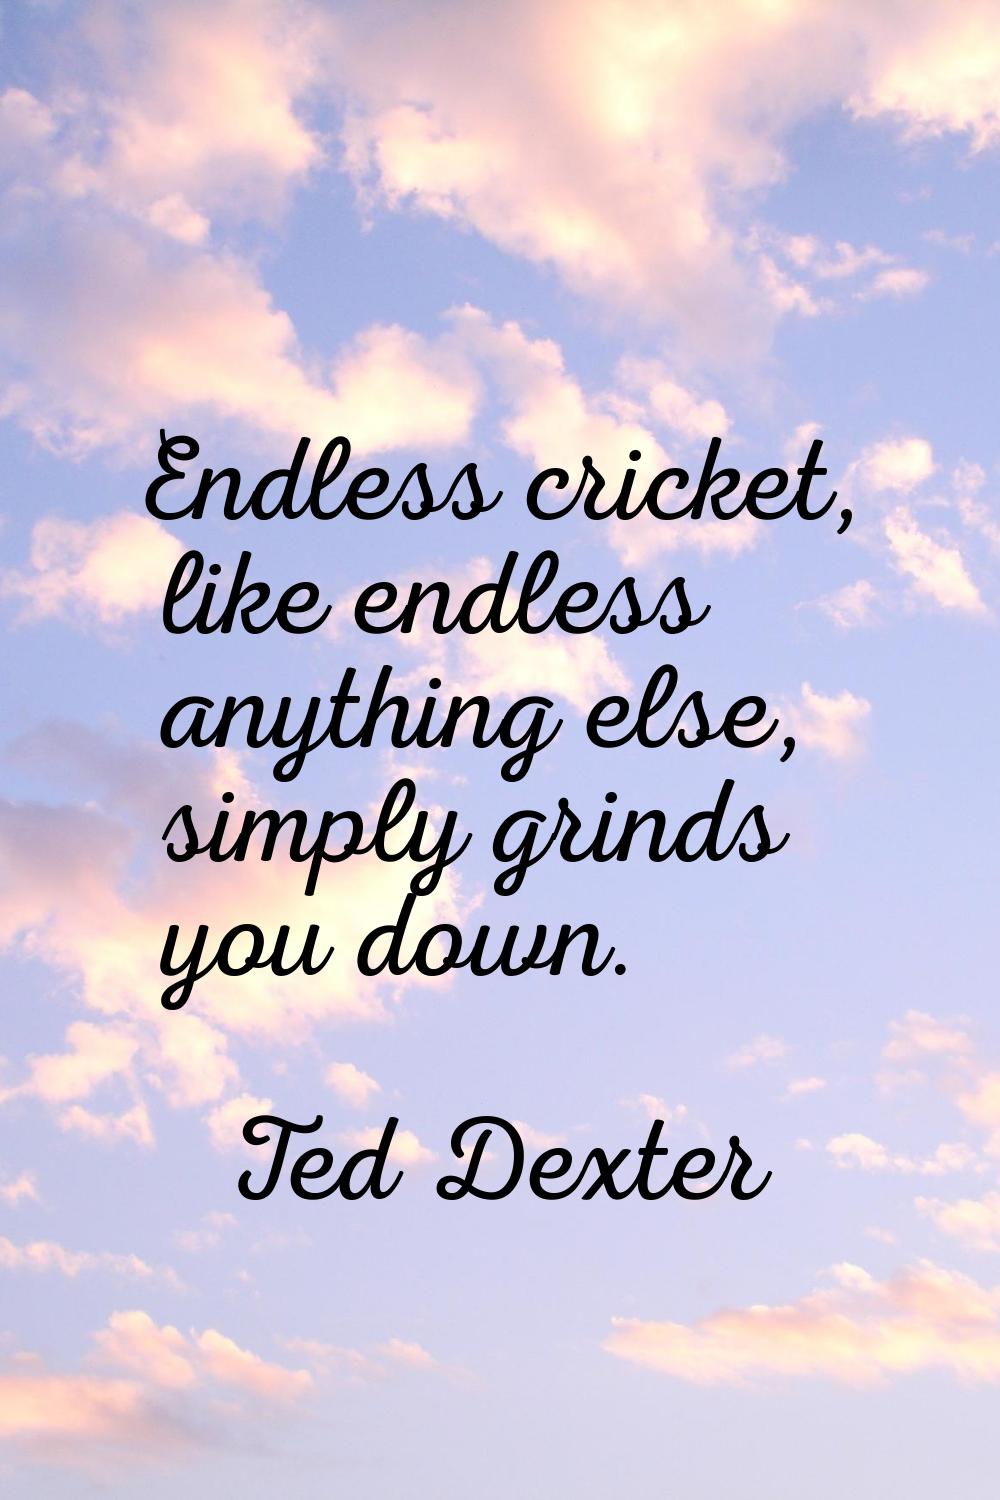 Endless cricket, like endless anything else, simply grinds you down.